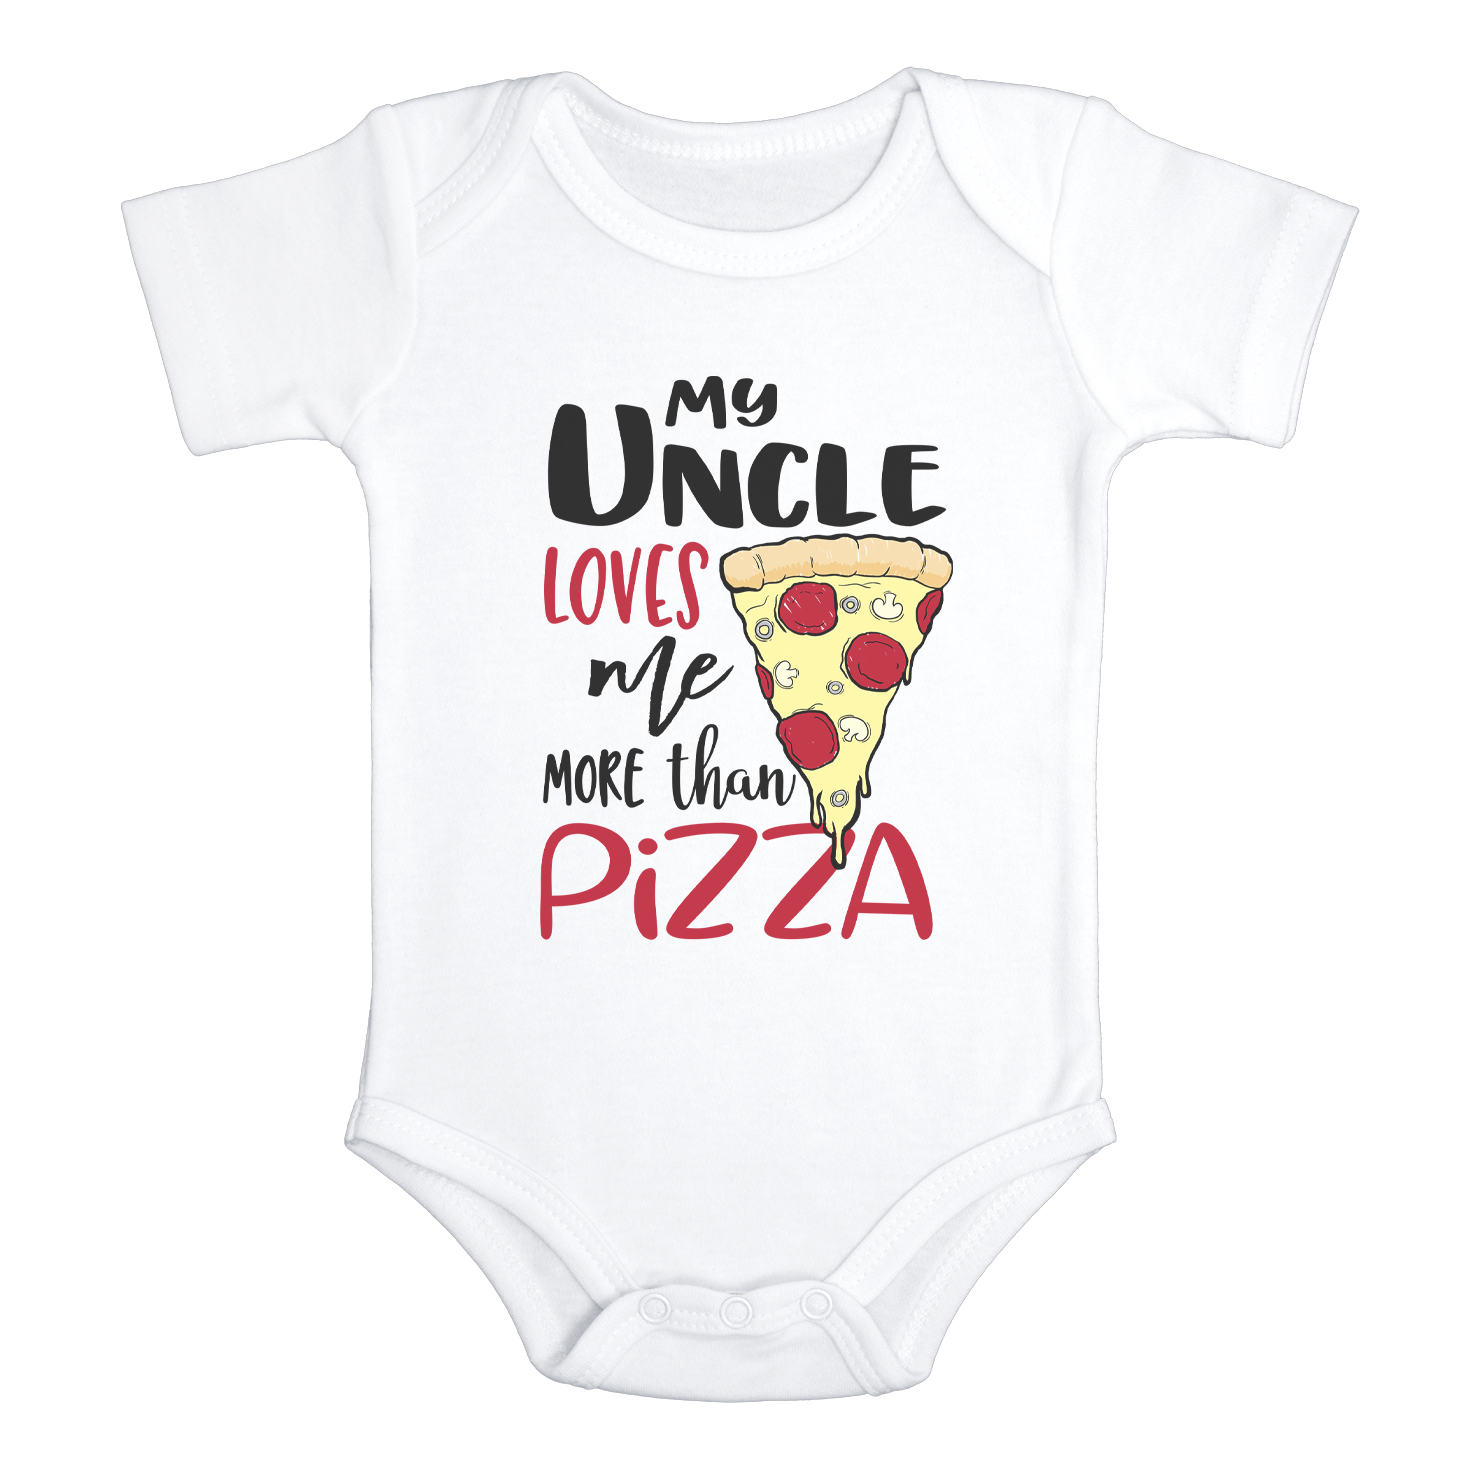 MY UNCLE LOVES ME MORE THAN PIZZA Funny Baby Bodysuit Cute Pizza Onesie White - HappyAddition